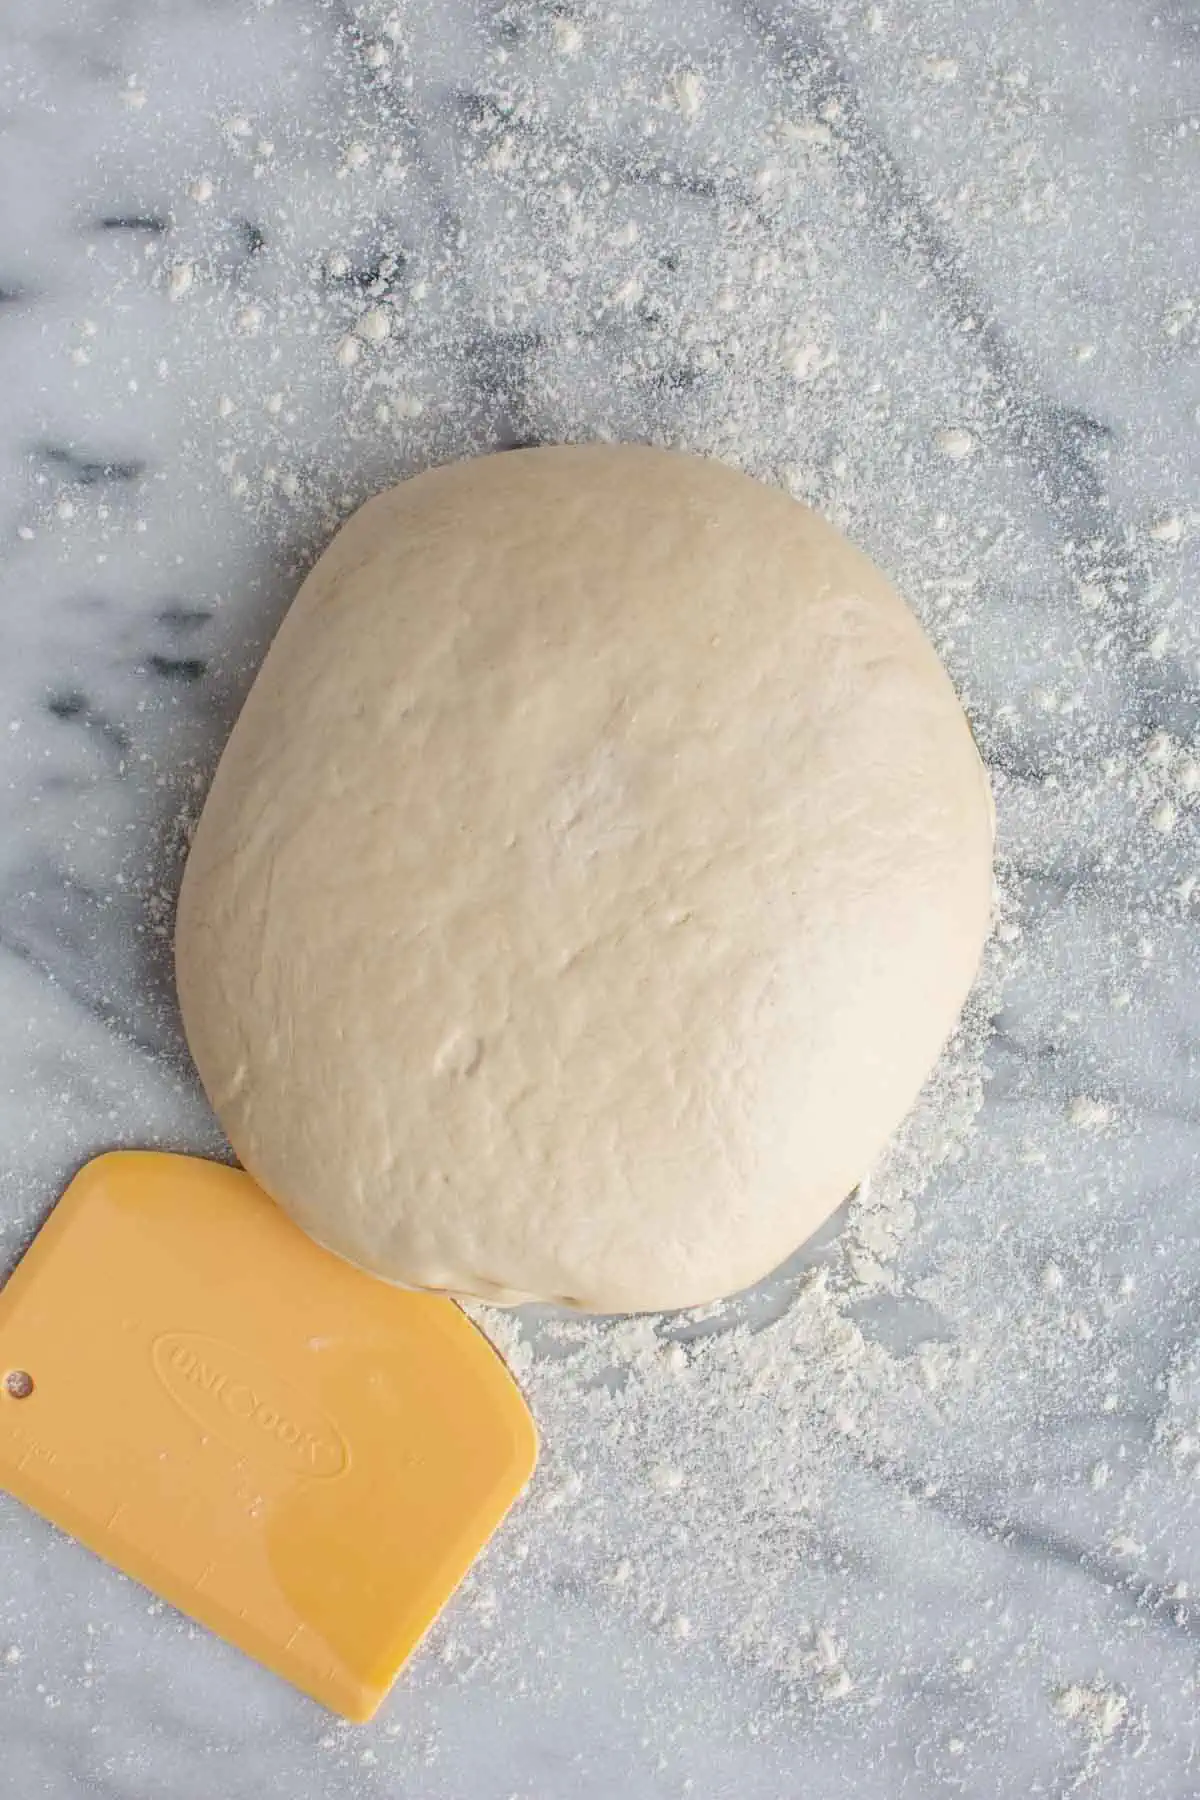 Large ball of pizza dough on a countertop.